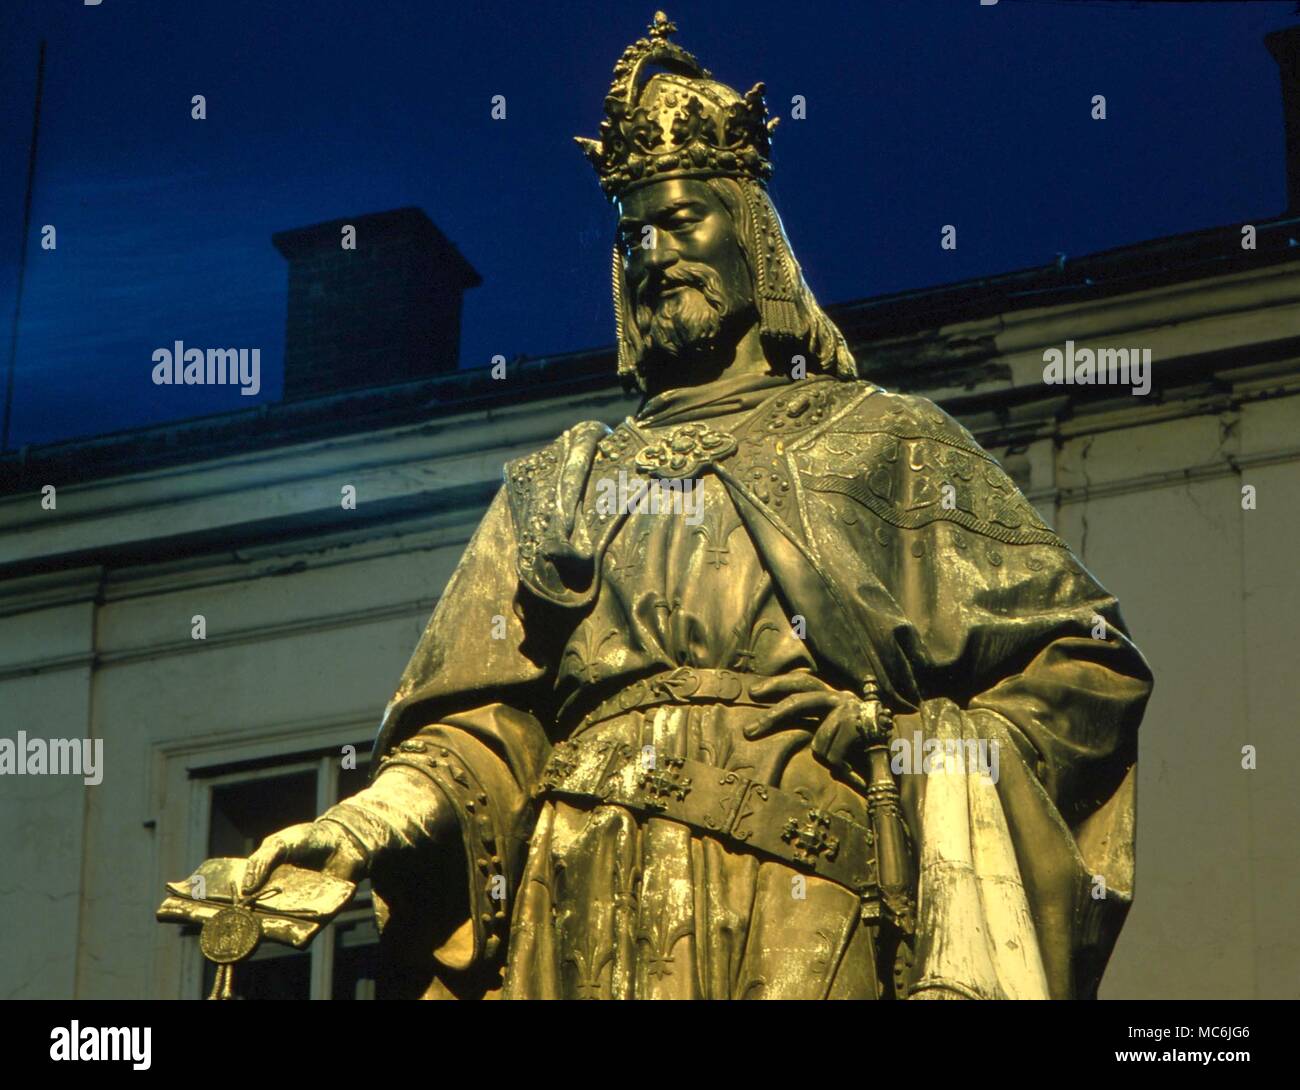 OCCULTISTS - CHARLES VI. Statue of Charles VI on the eastern bank of the Vitava river, by the Charles Bridge. Charles VI is said to have been Europe's last initiate ruler Stock Photo